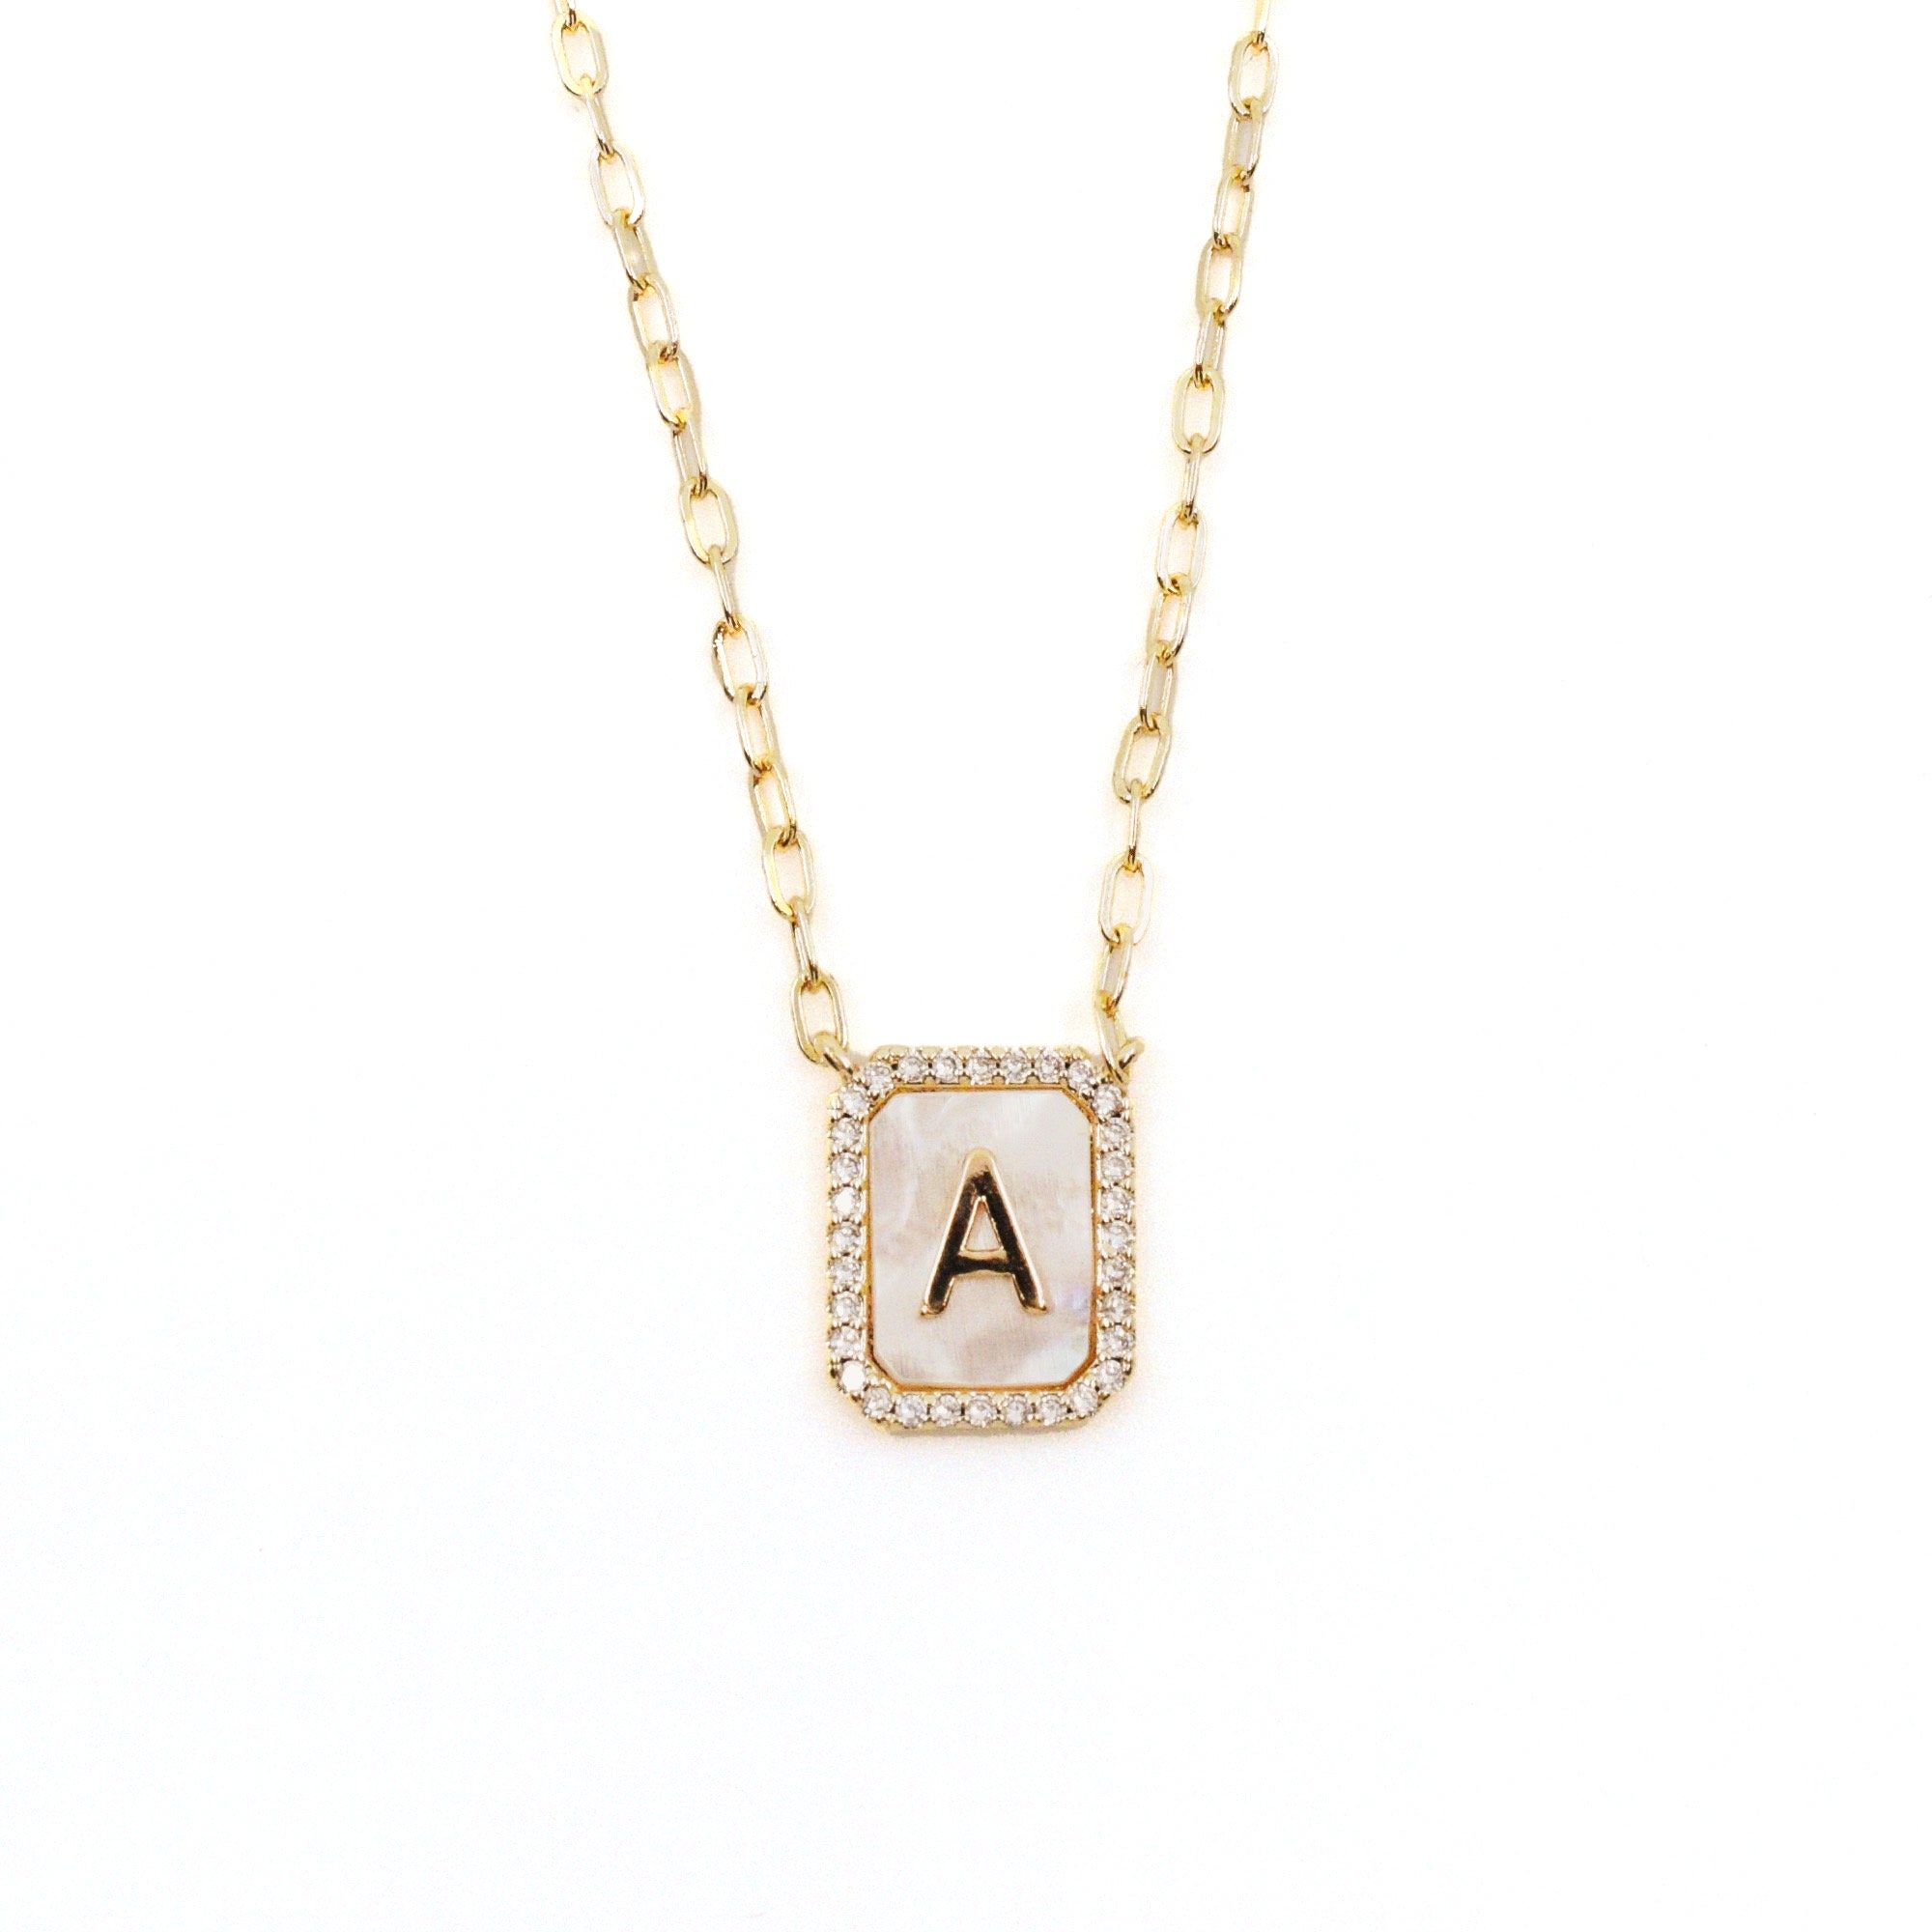 Alphabet Letter Necklace - Mother of Pearl & Crystals Small Tag